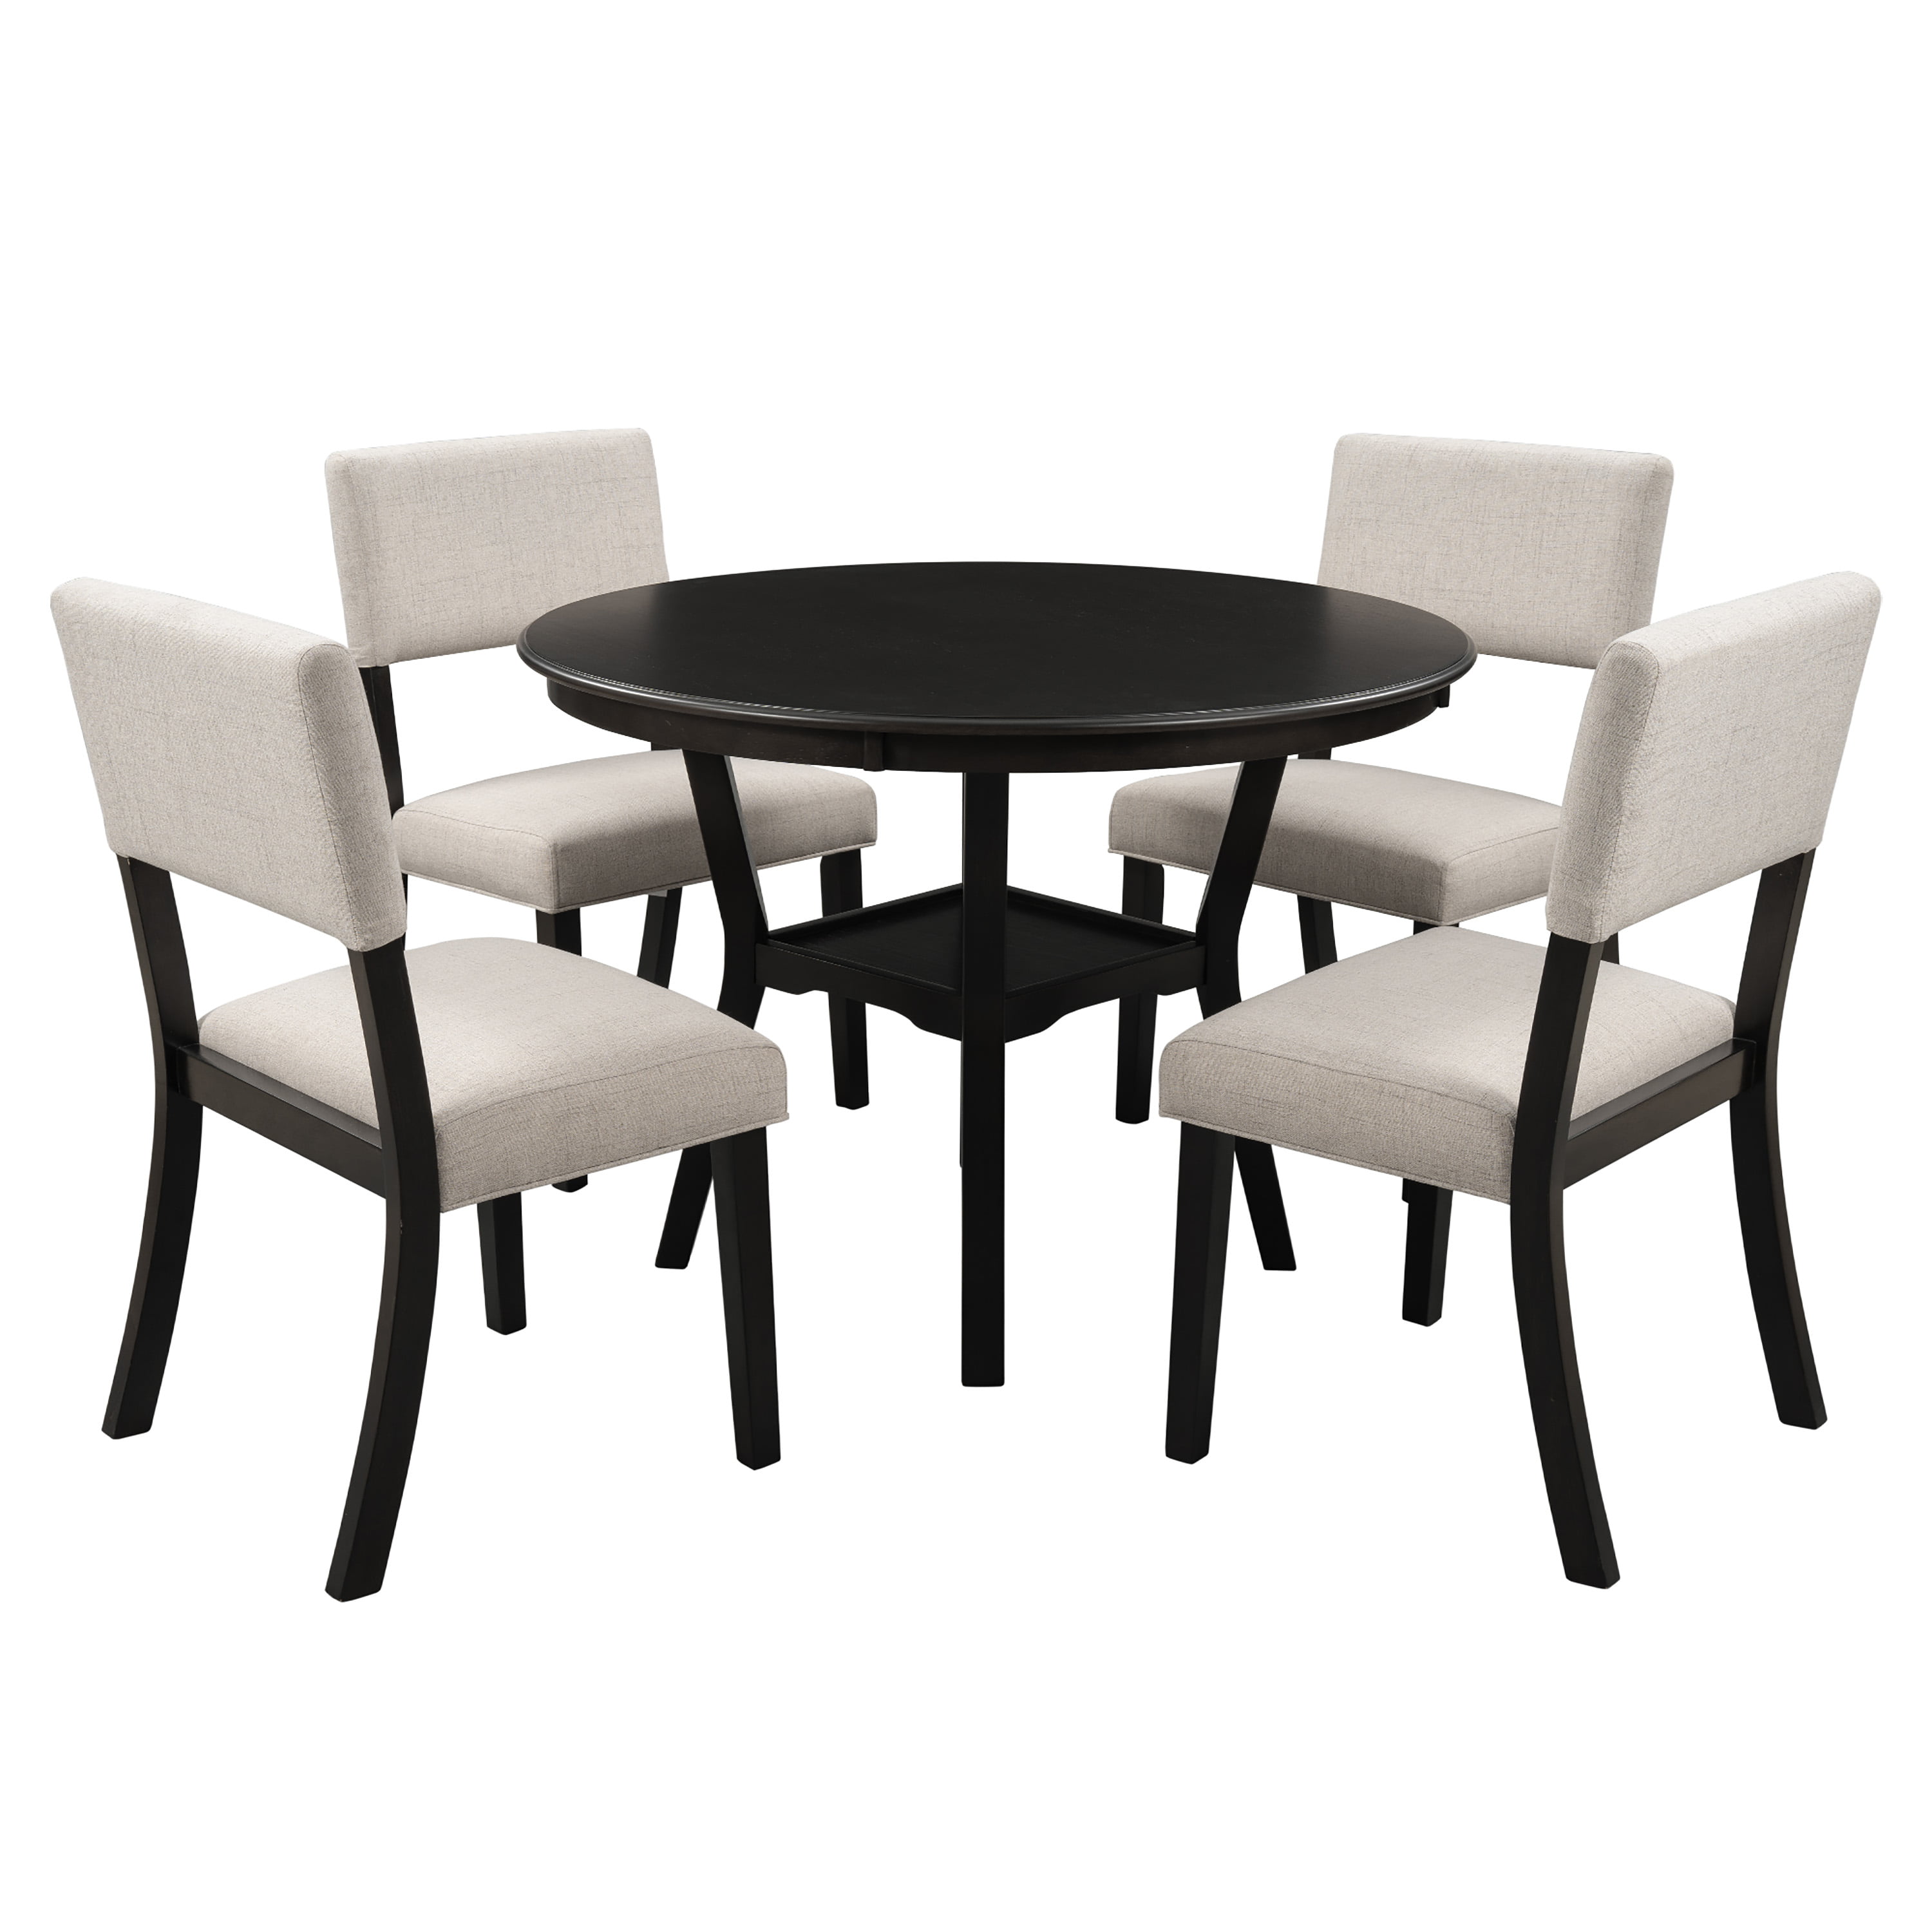 5 Piece Kitchen Dining Table Set Round, Round Dining Table Upholstered Chairs